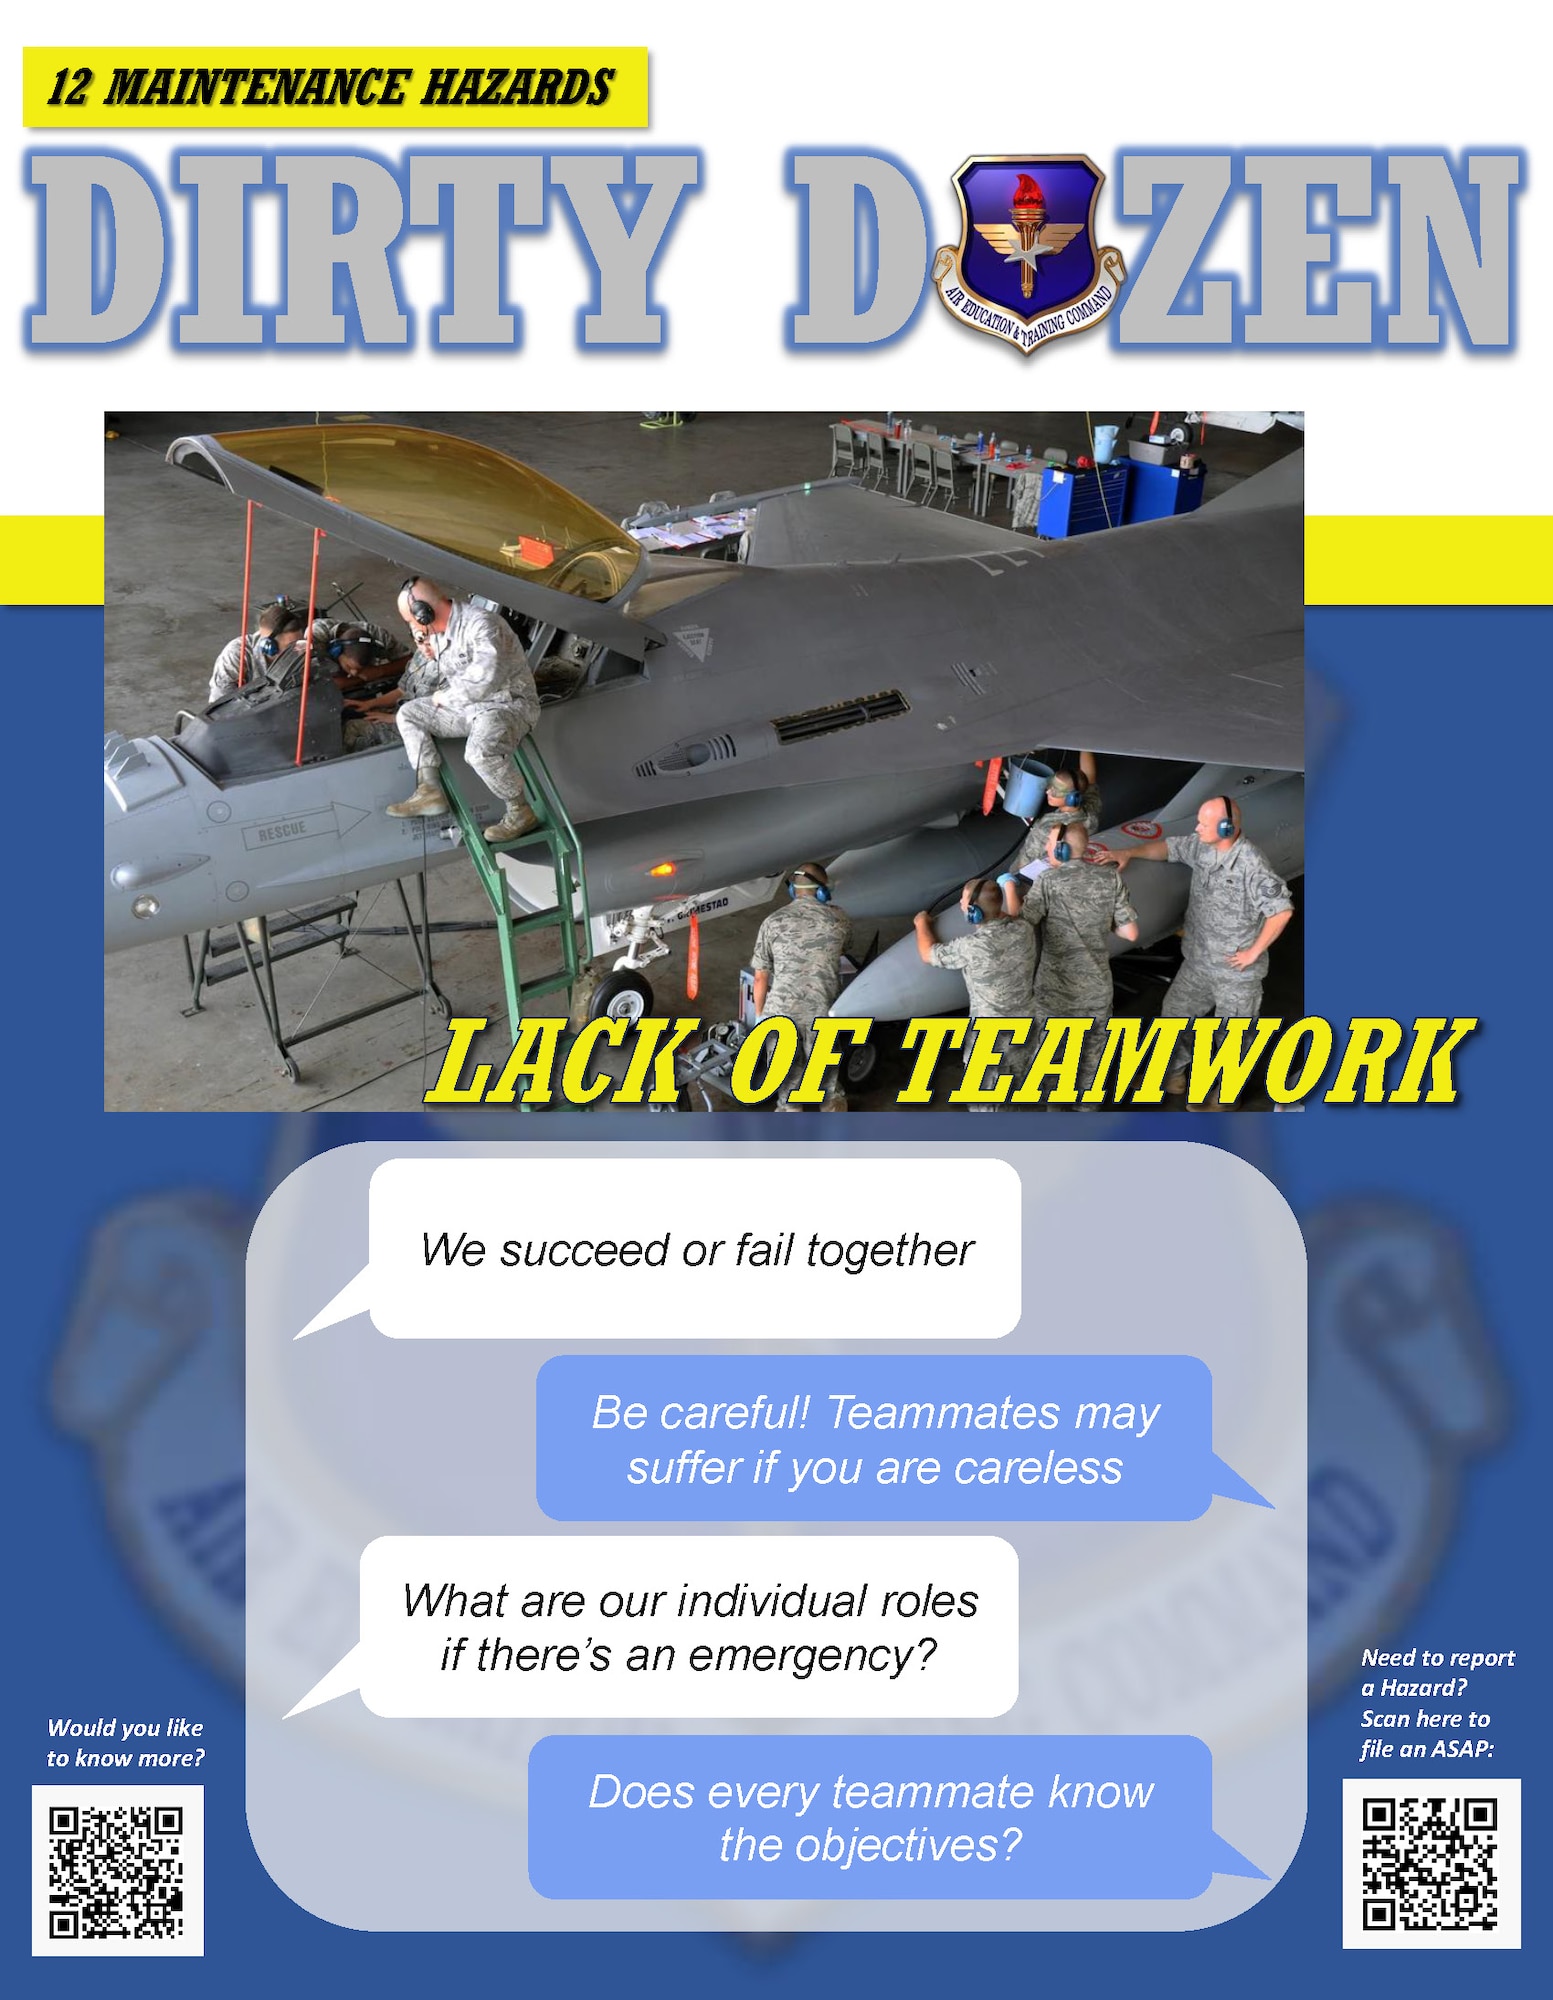 Lack of teamwork is one of the Dirty Dozen, which highlights common human error factors in aircraft maintenance mishaps.